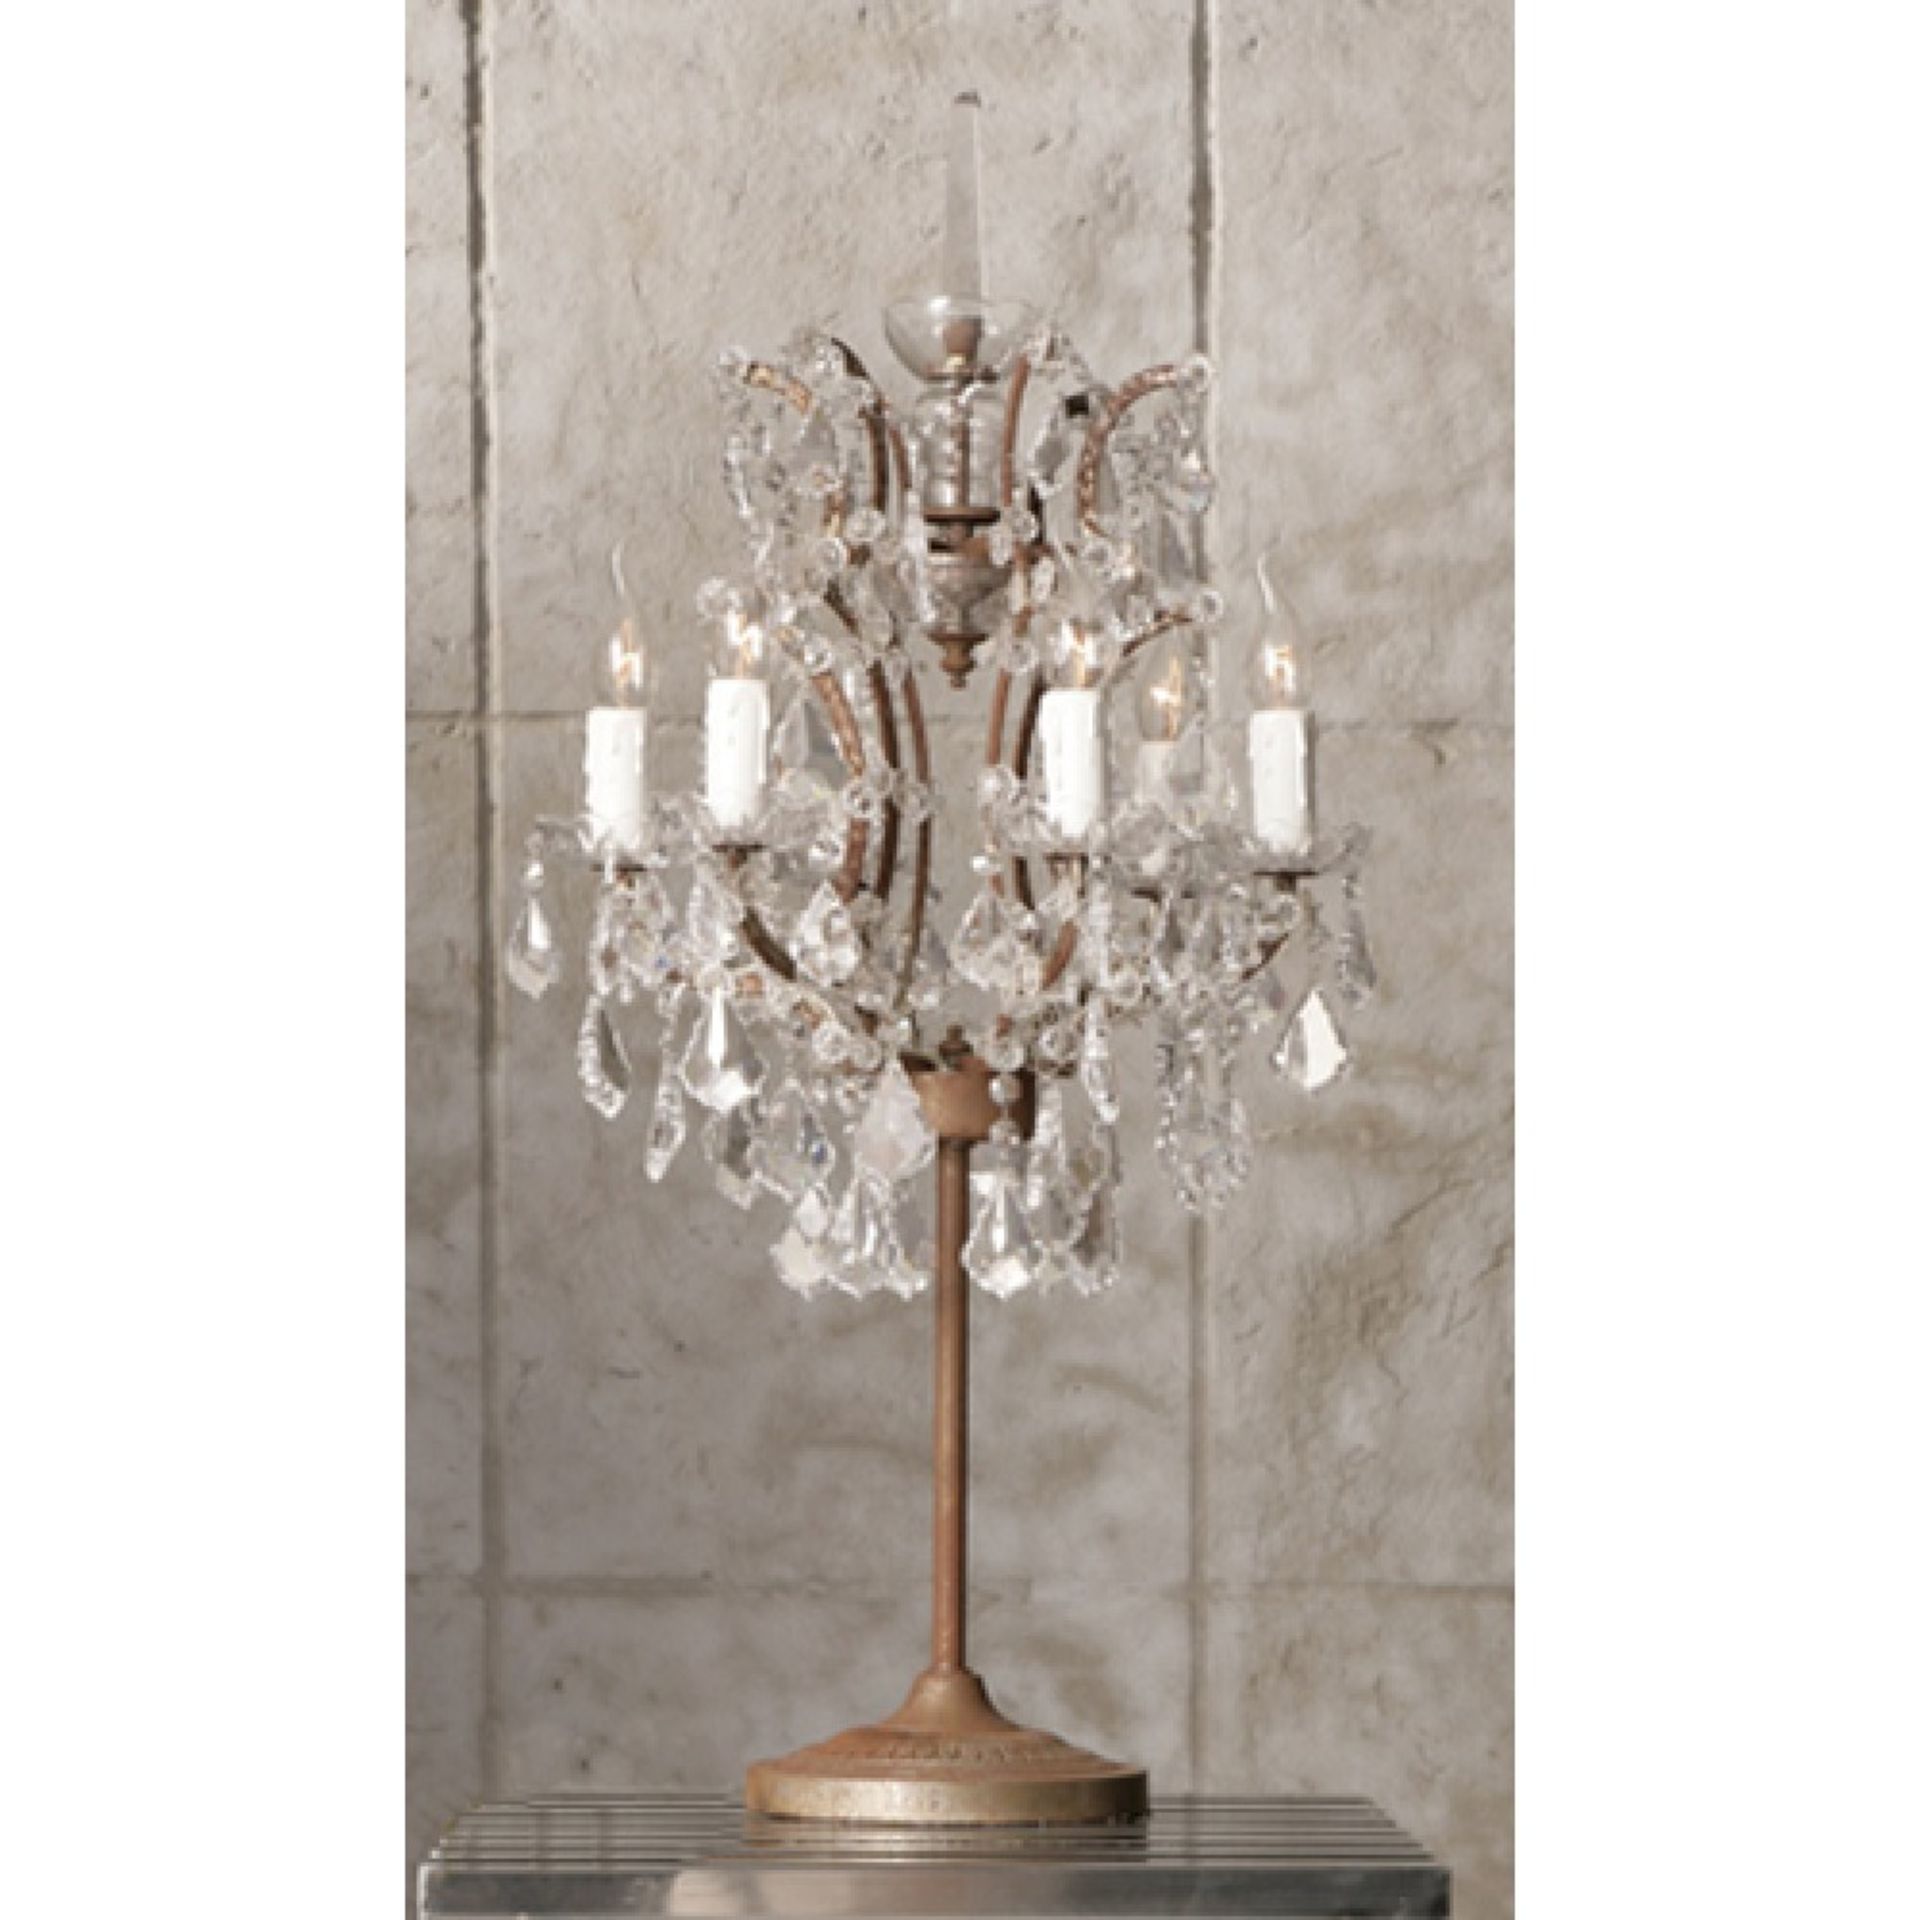 Crystal Chandelier Table Lamp The Crystal Chandelier Collection Is Inspired By The Elaborate Designs